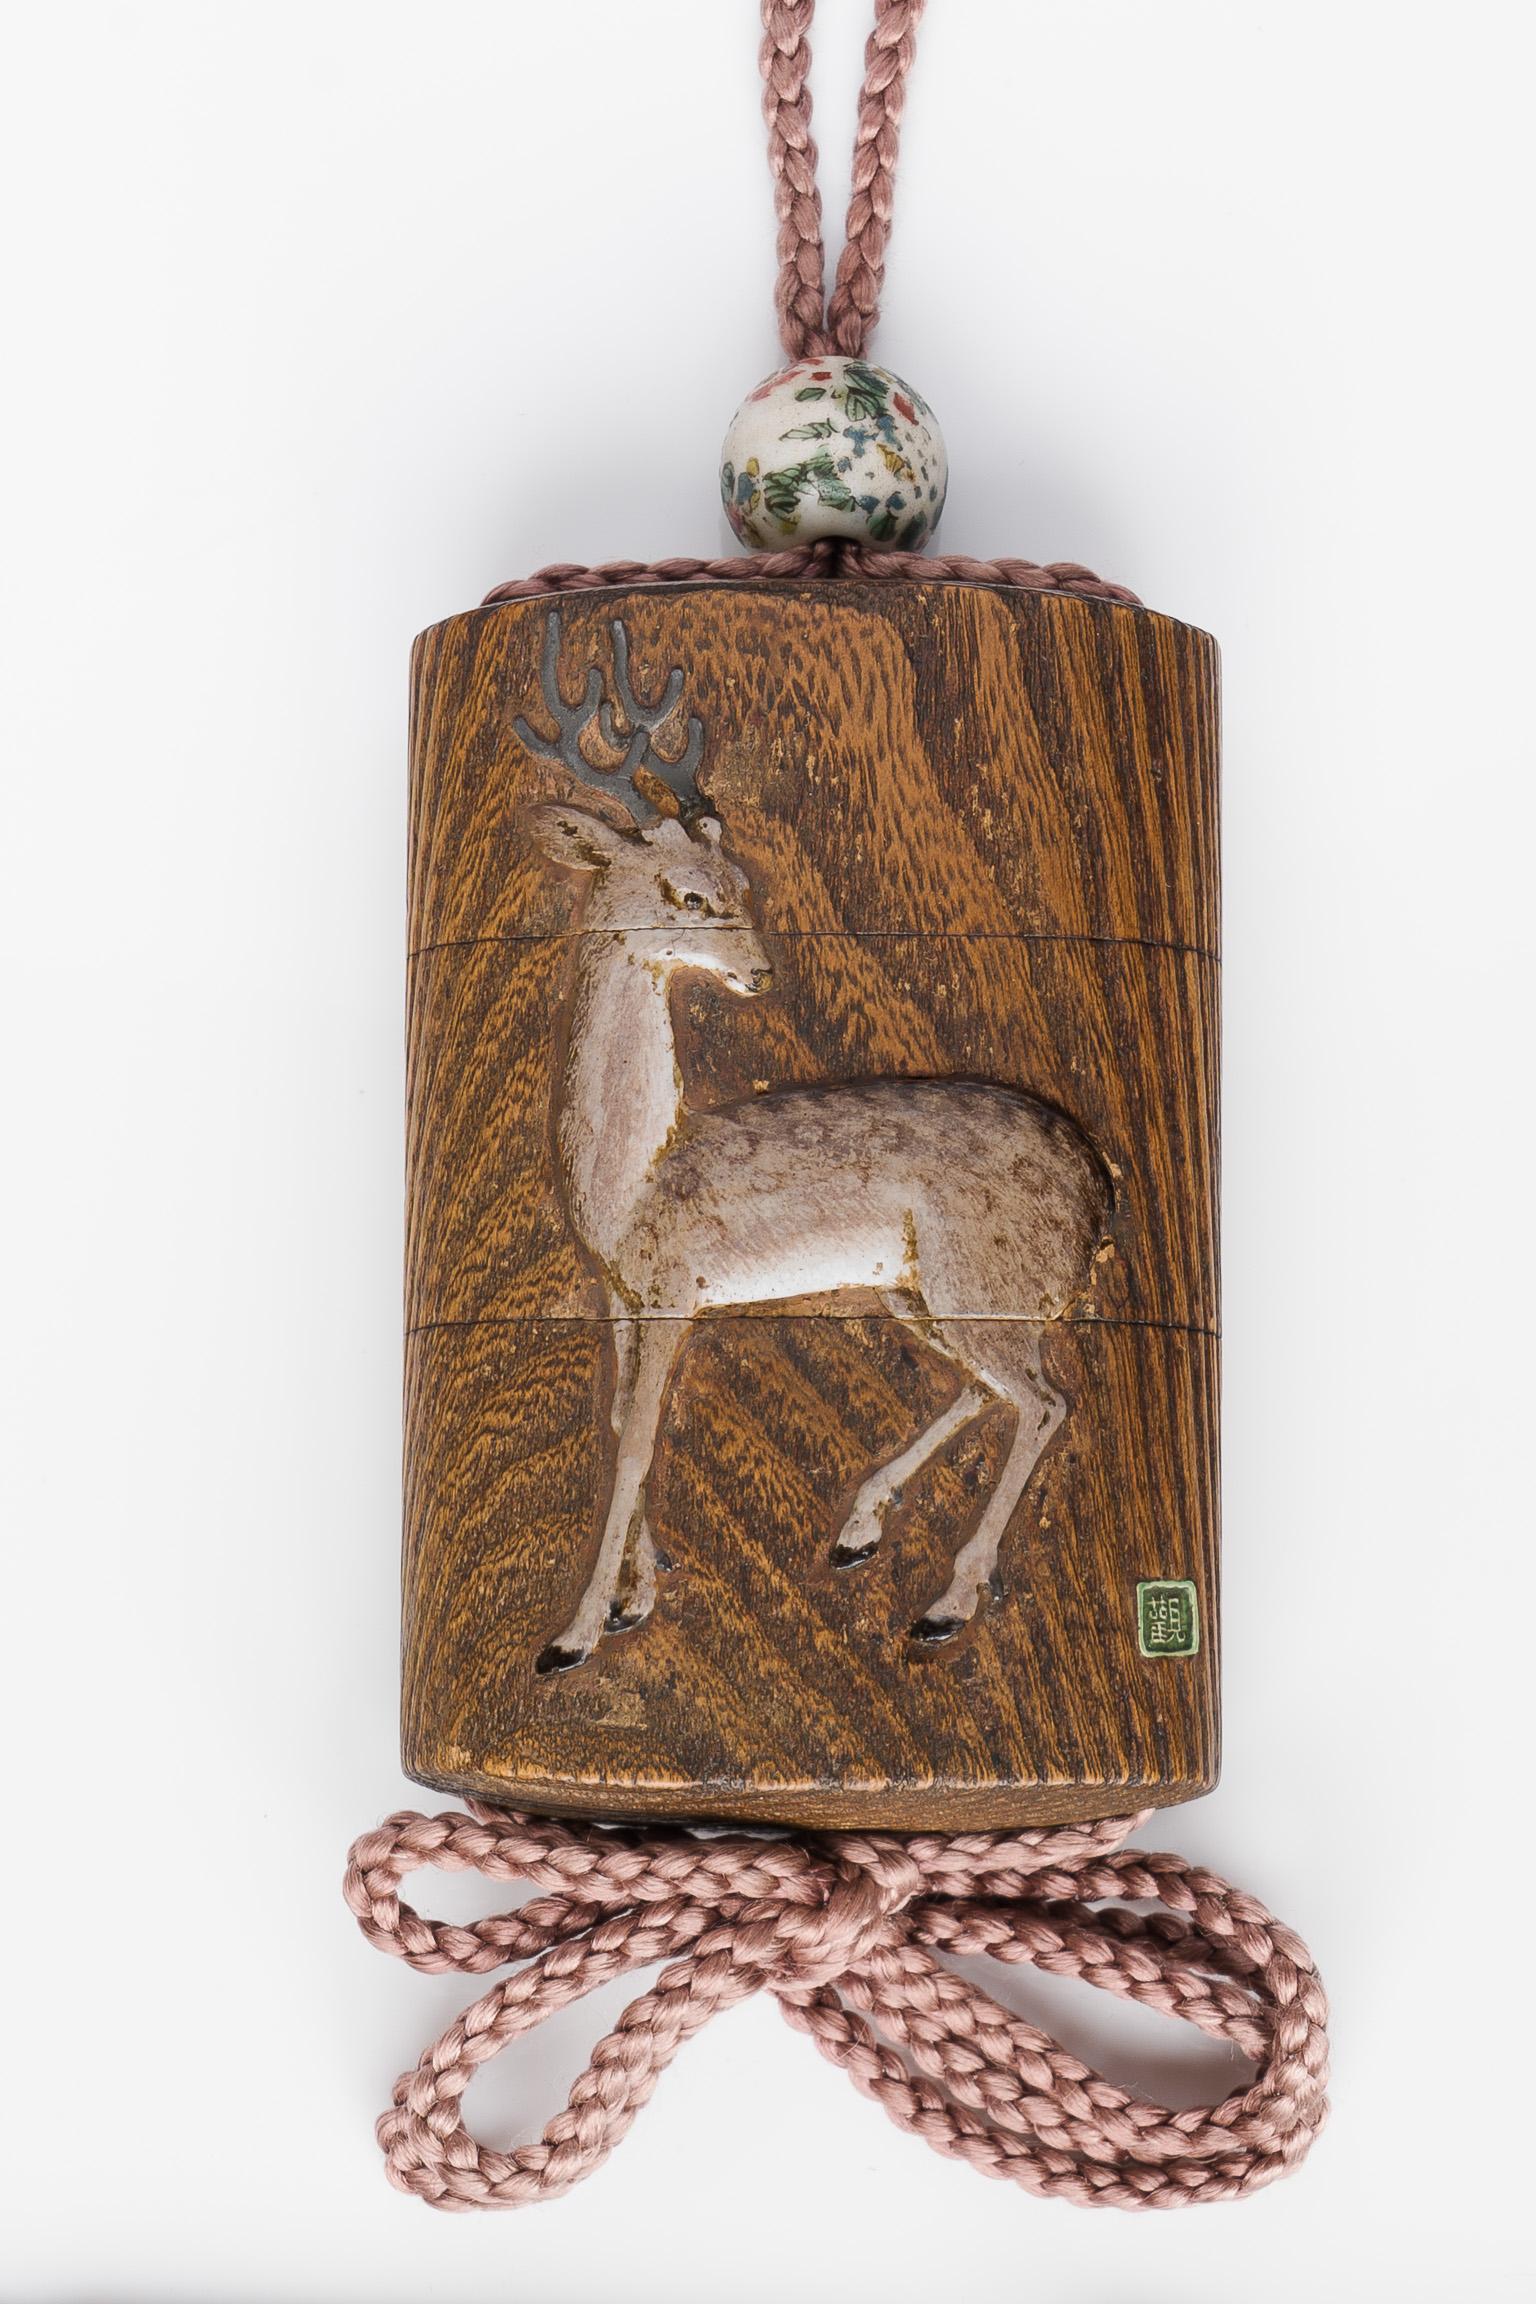 Mochizuki Hanzan (1743–90?)
Edo Period, 18th century

Decorated with inlaid coloured ceramic with a stag and maple leaves

Height: 8.4 cm

Sealed Hanzan

 

Mochizuki Hanzan (1743–90?) was one of the most talented followers of Ogawa Haritsu